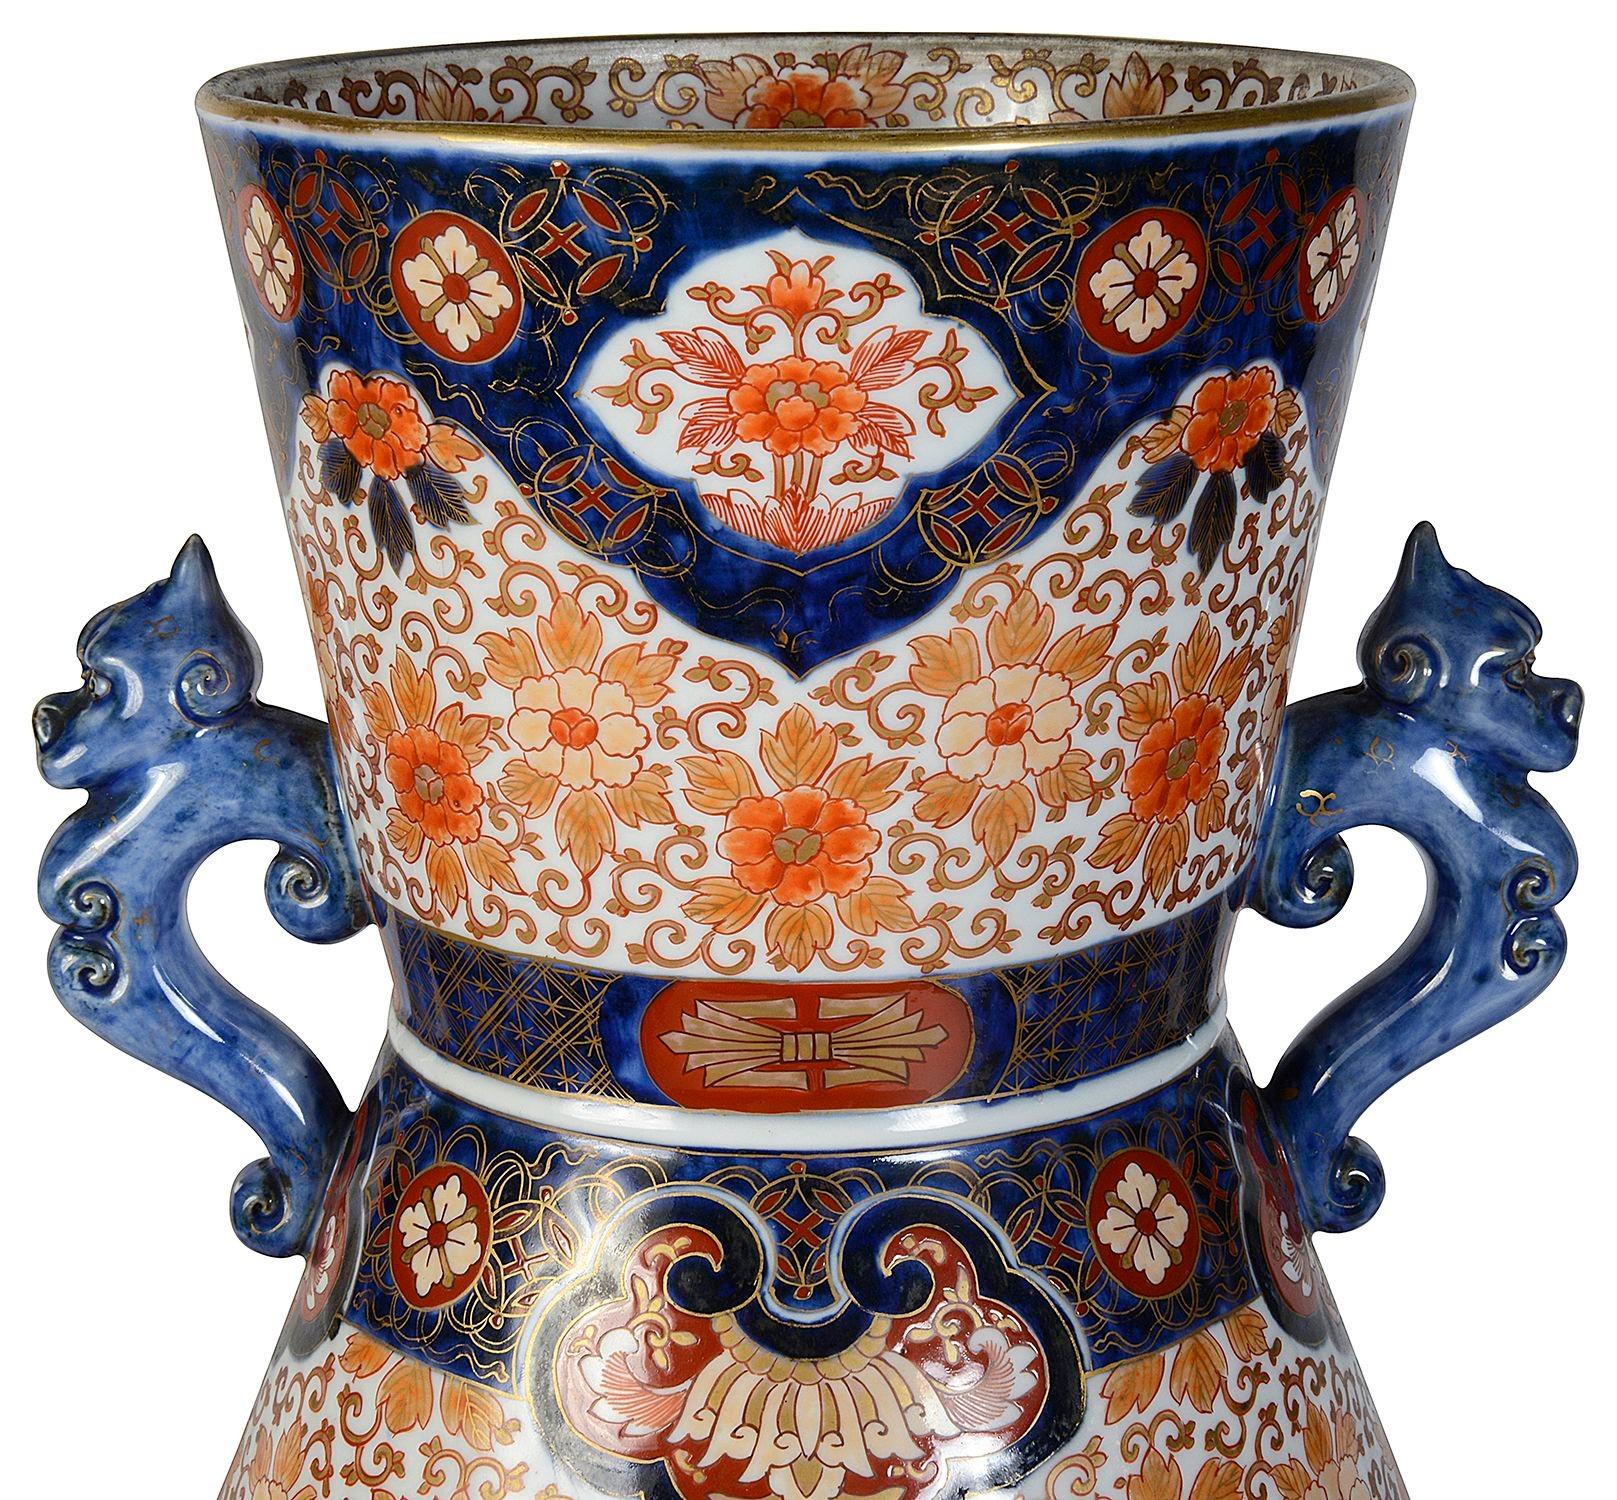 A very good quality late 19th century Japanese Imari porcelain vase, having wonderful bold classical Imari colours of blue, orange and gilt.
The ground with classical motif decoration, inset hand painted panels depicting blossom trees. Handles to